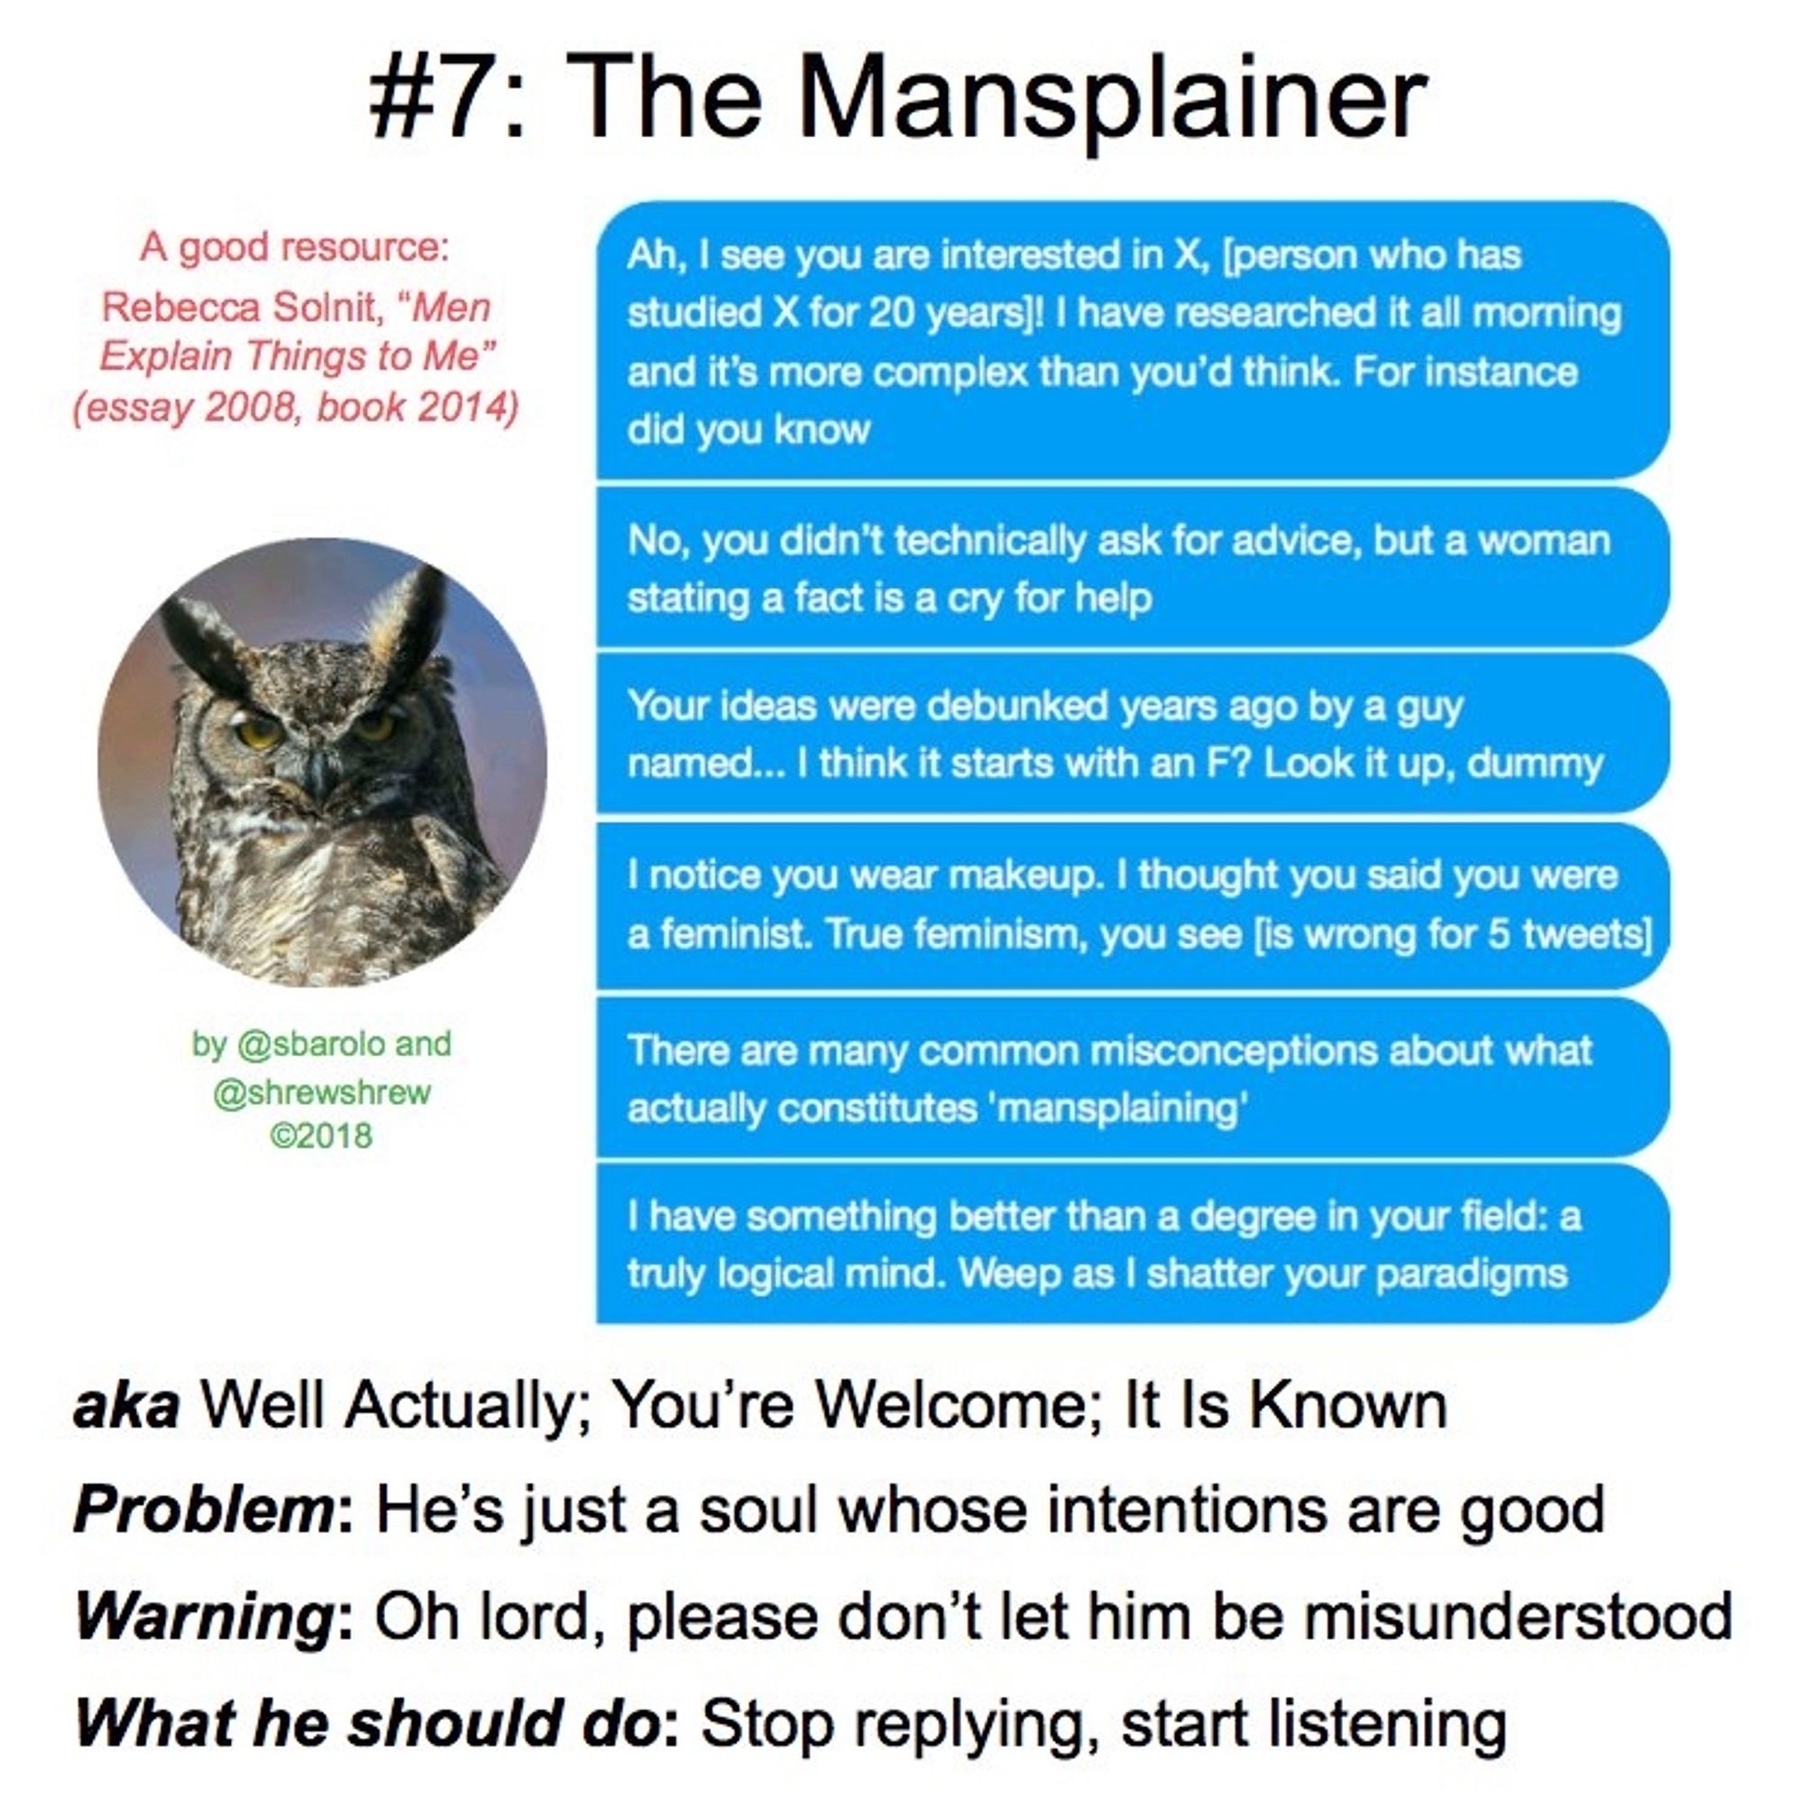 #7: The Mansplainer&10;A good resource:&10;Rebecca Solnit, "Men Explain Things to Me" (essay 2008, book 2014)&10;by @sbarolo and @shrewshrew&10;©2018&10;Ah, I see you are interested in X, [person who has studied X for 20 years]! I have researched it all morning and it's more complex than you'd think. For instance did you know&10;No, you didn't technically ask for advice, but a woman stating a fact is a cry for help&10;Your ideas were debunked years ago by a guy named... I think it starts with an F? Look it up, dummy&10;I notice you wear makeup. I thought you said you were a feminist. True feminism, you see [is wrong for 5 tweets]&10;There are many common misconceptions about what actually constitutes 'mansplaining'&10;I have something better than a degree in your field: a truly logical mind. Weep as I shatter your paradigms&10;aka Well Actually; You're Welcome; It Is Known Problem: He's just a soul whose intentions are good Warning: Oh lord, please don't let him be misunderstood What he should do: Stop replying, start listening